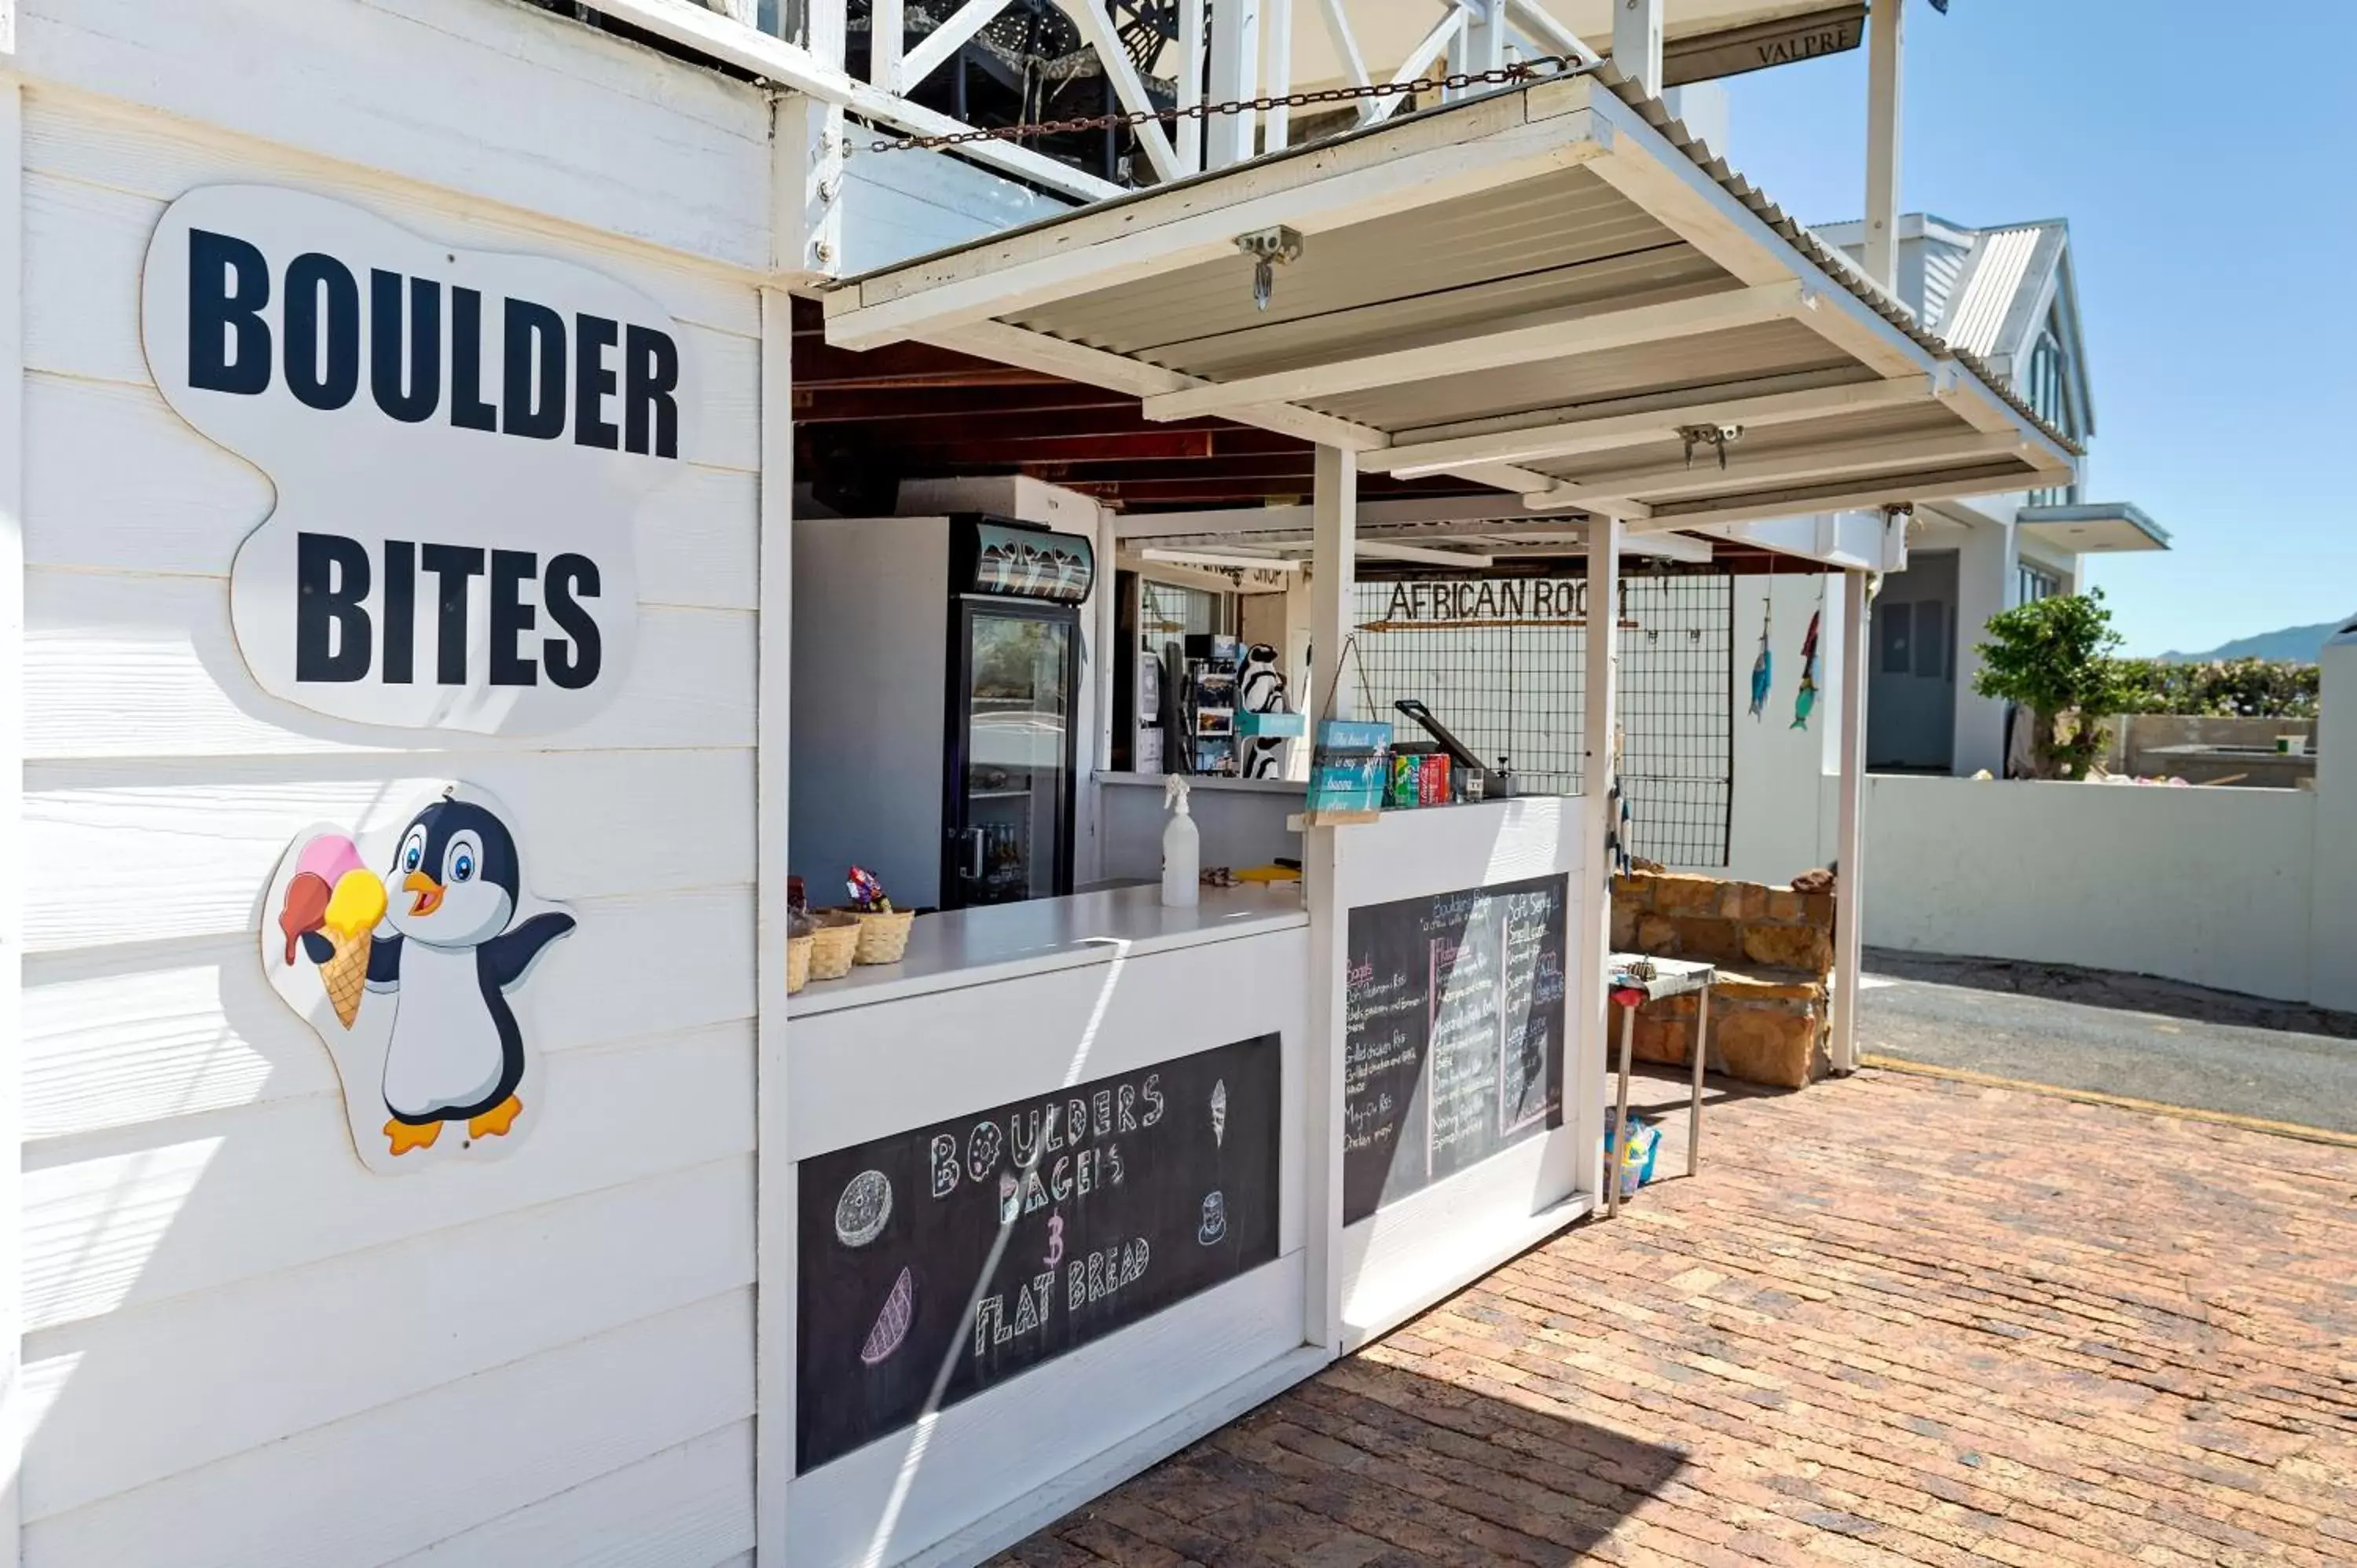 Restaurant/places to eat in Boulders Beach Hotel, Cafe and Curio shop